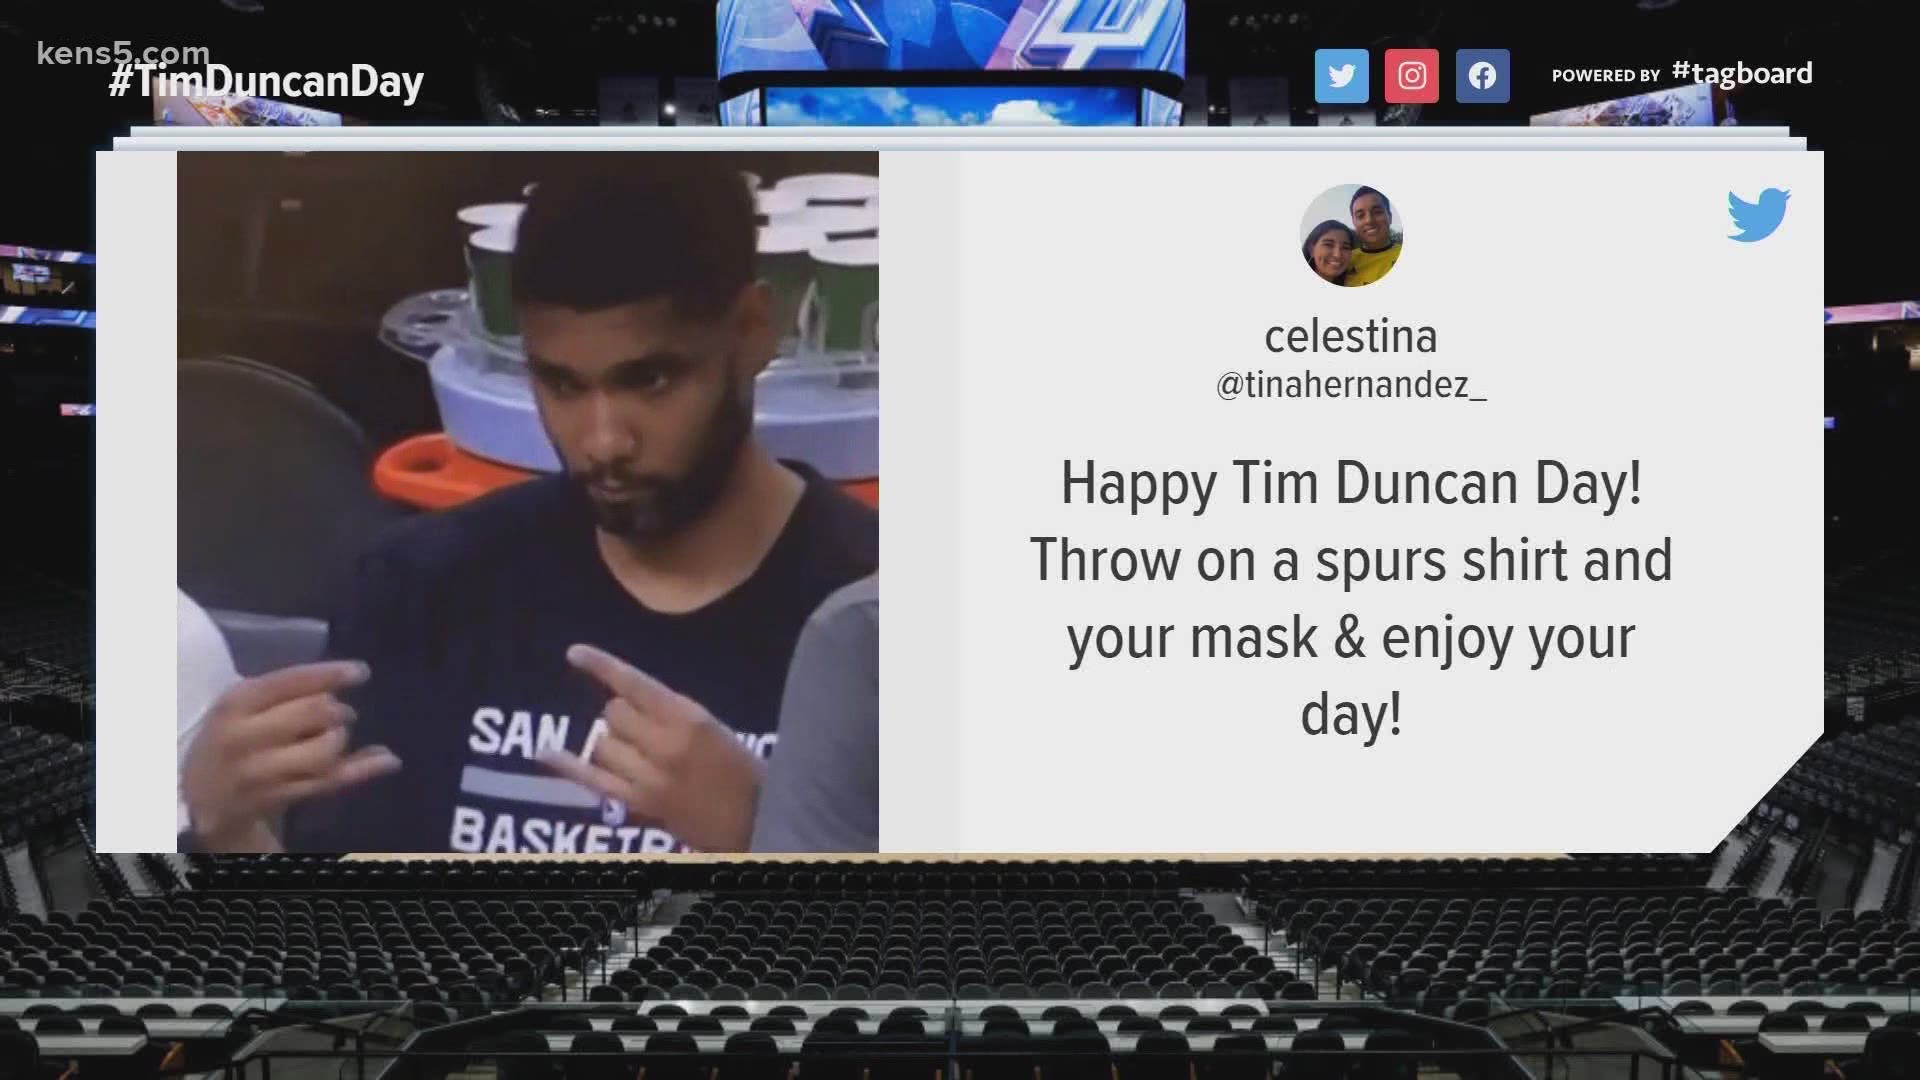 A week after Tim Duncan announced his retirement from basketball in 2016, then-mayor Ivy Taylor declared July 21 Tim Duncan Day in San Antonio.